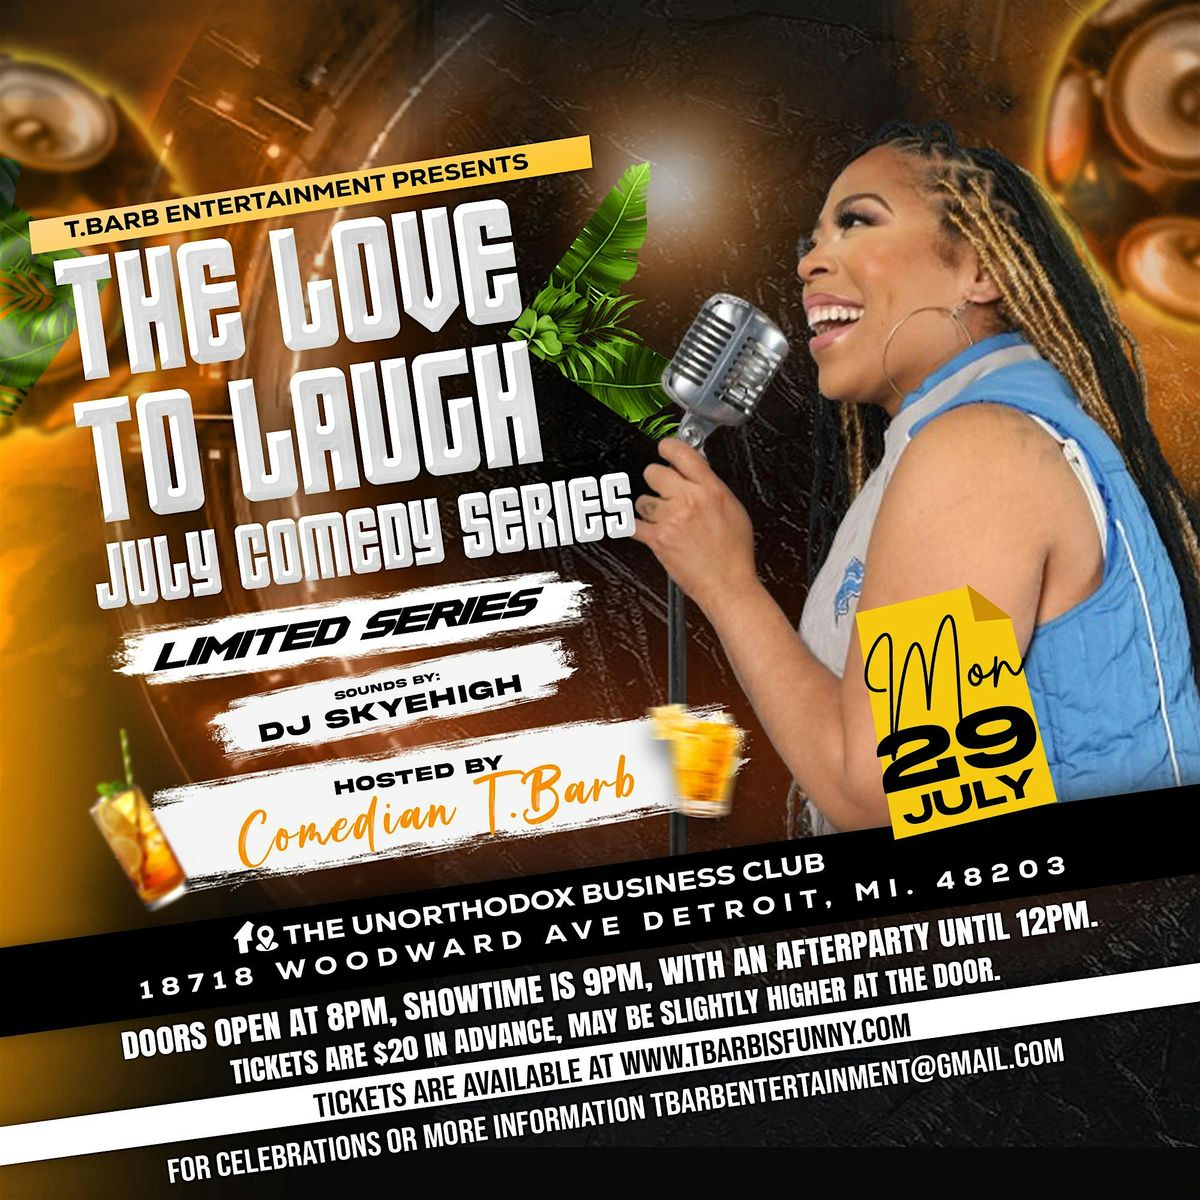 The Love To Laugh July Comedy Series